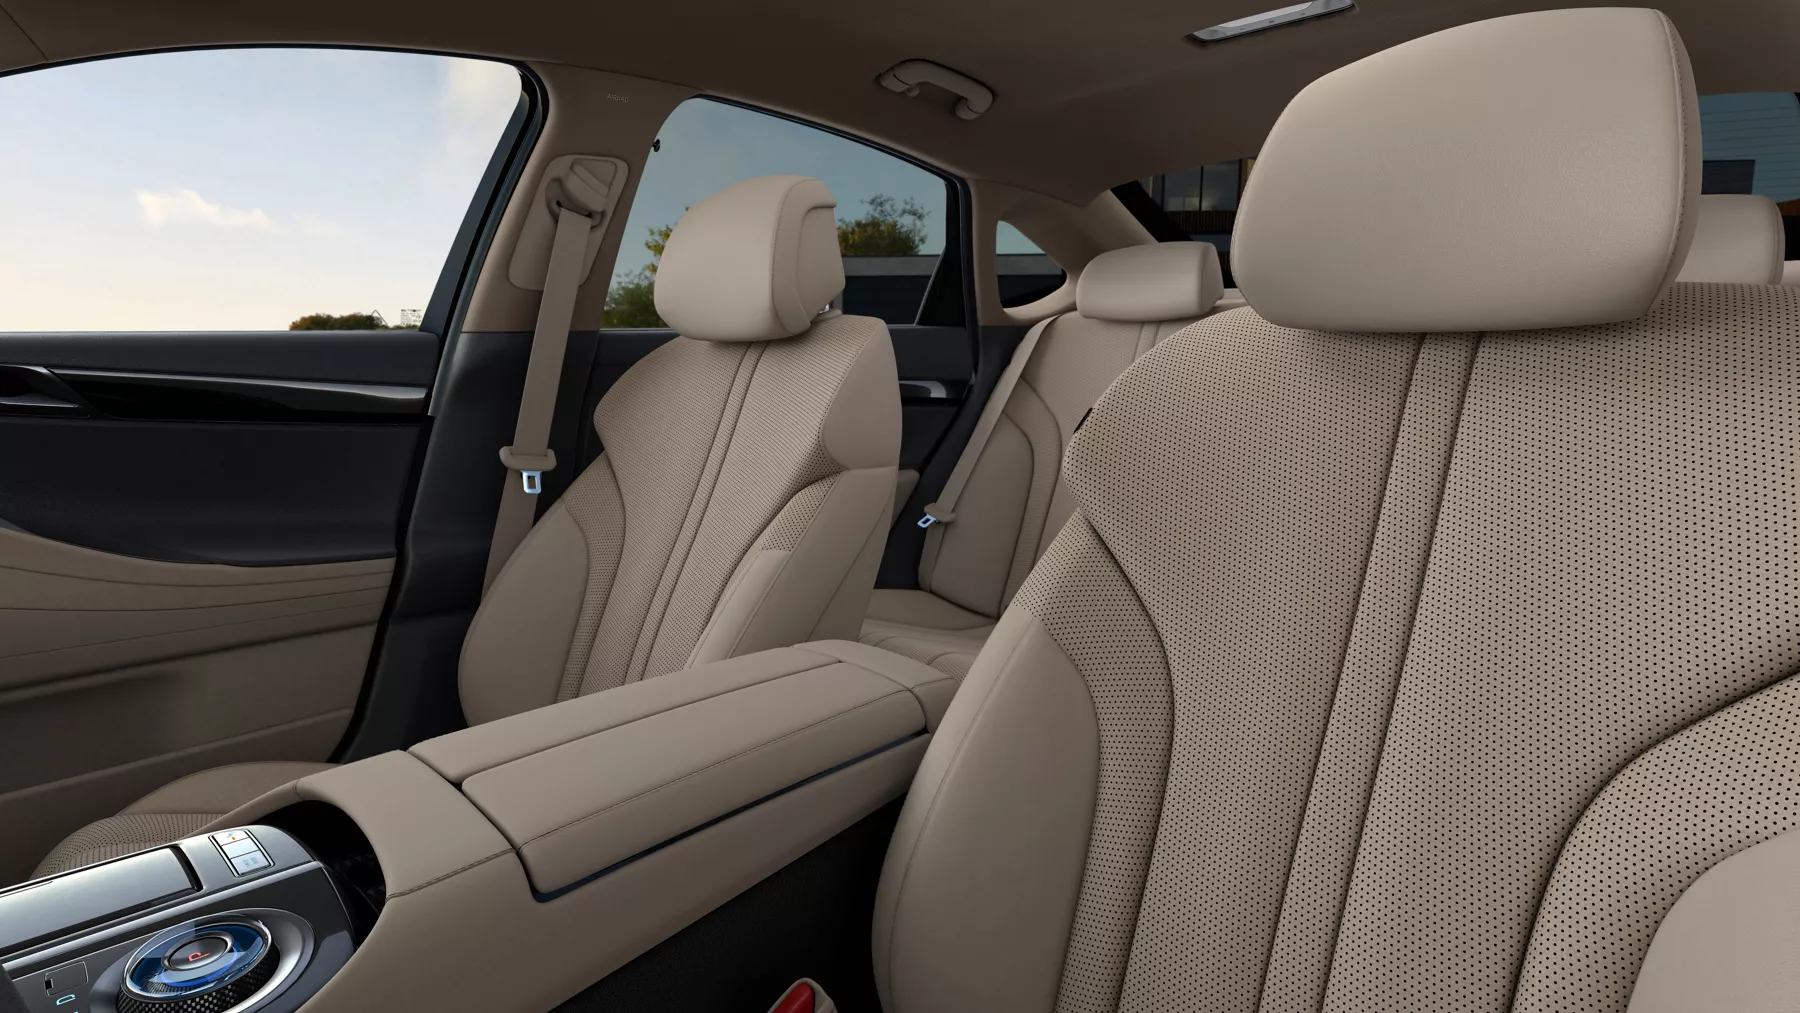 G80 front seats in beige color.